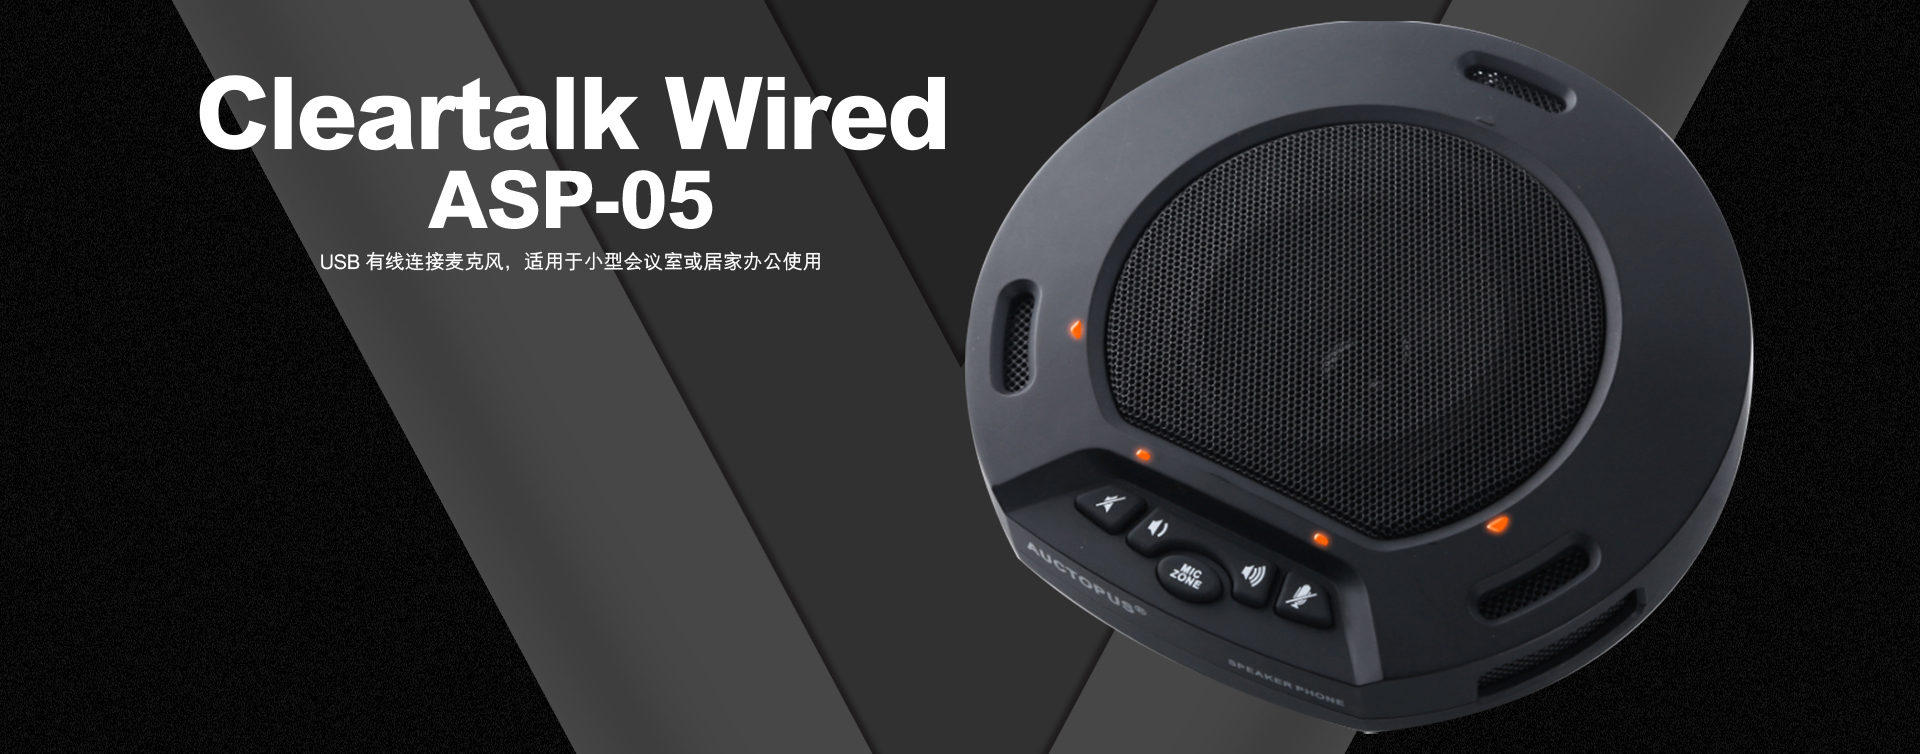 Cleartalk Wired ASP-05